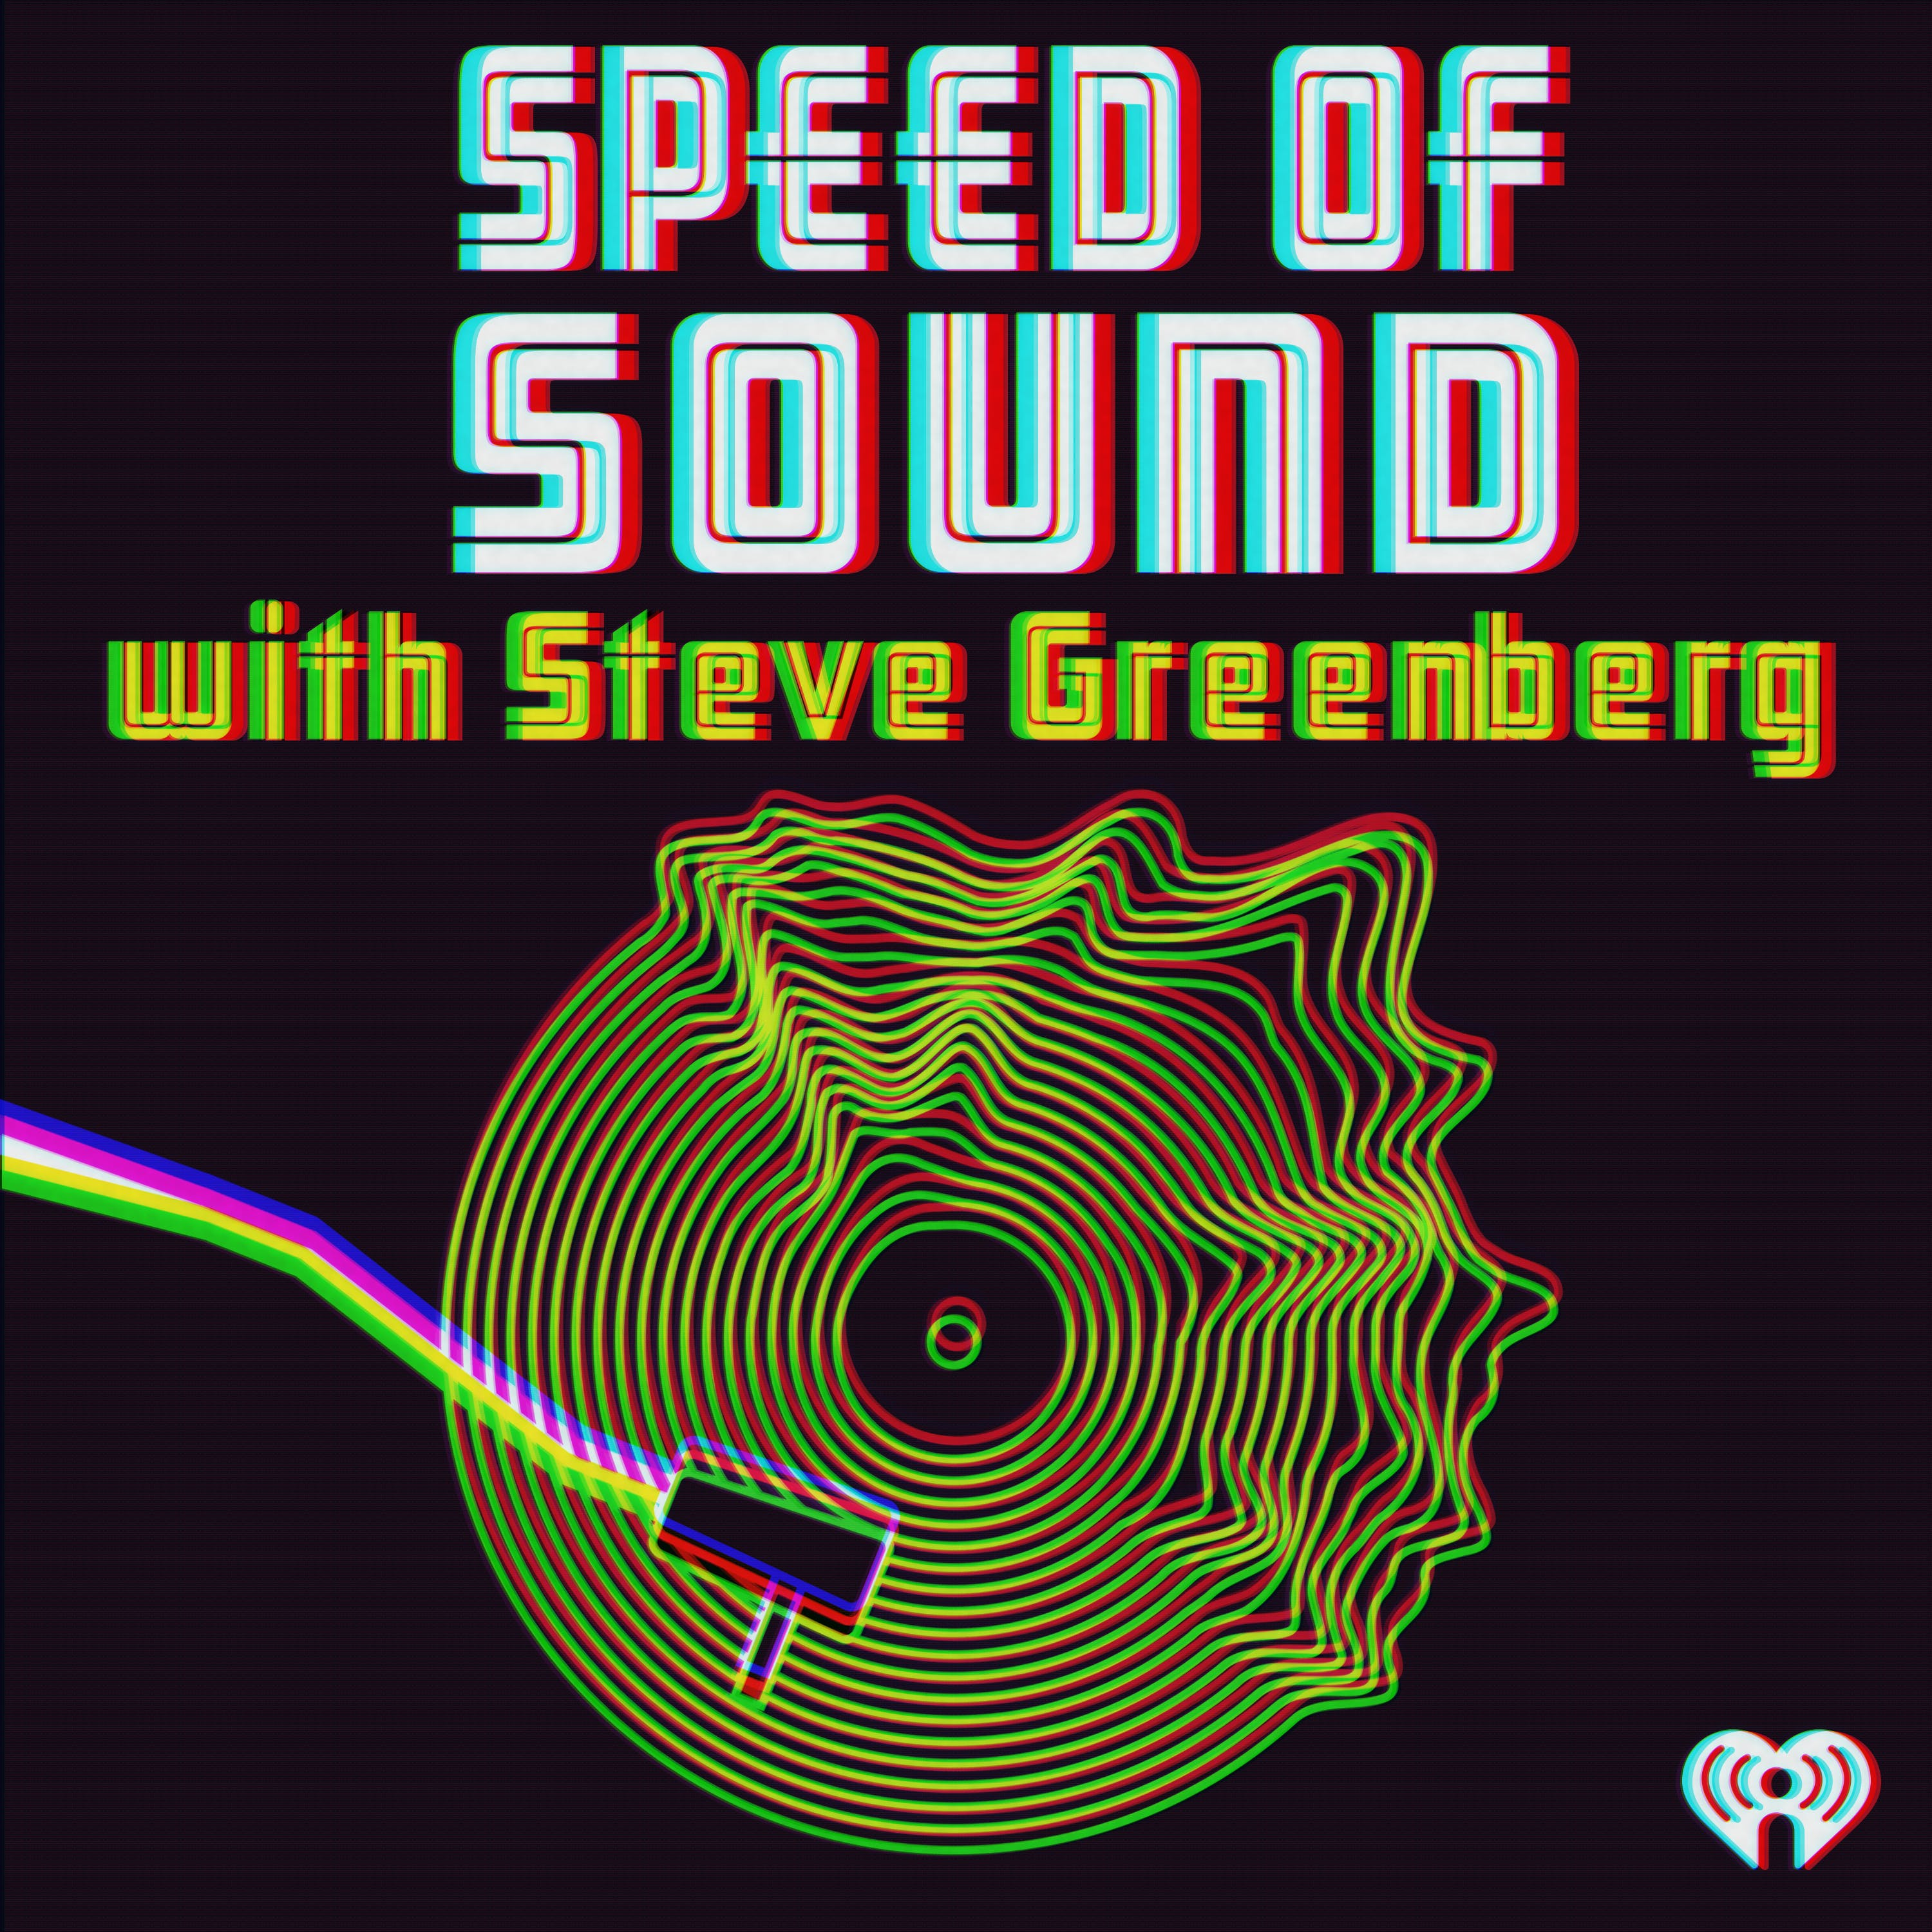 Introducing: Speed of Sound